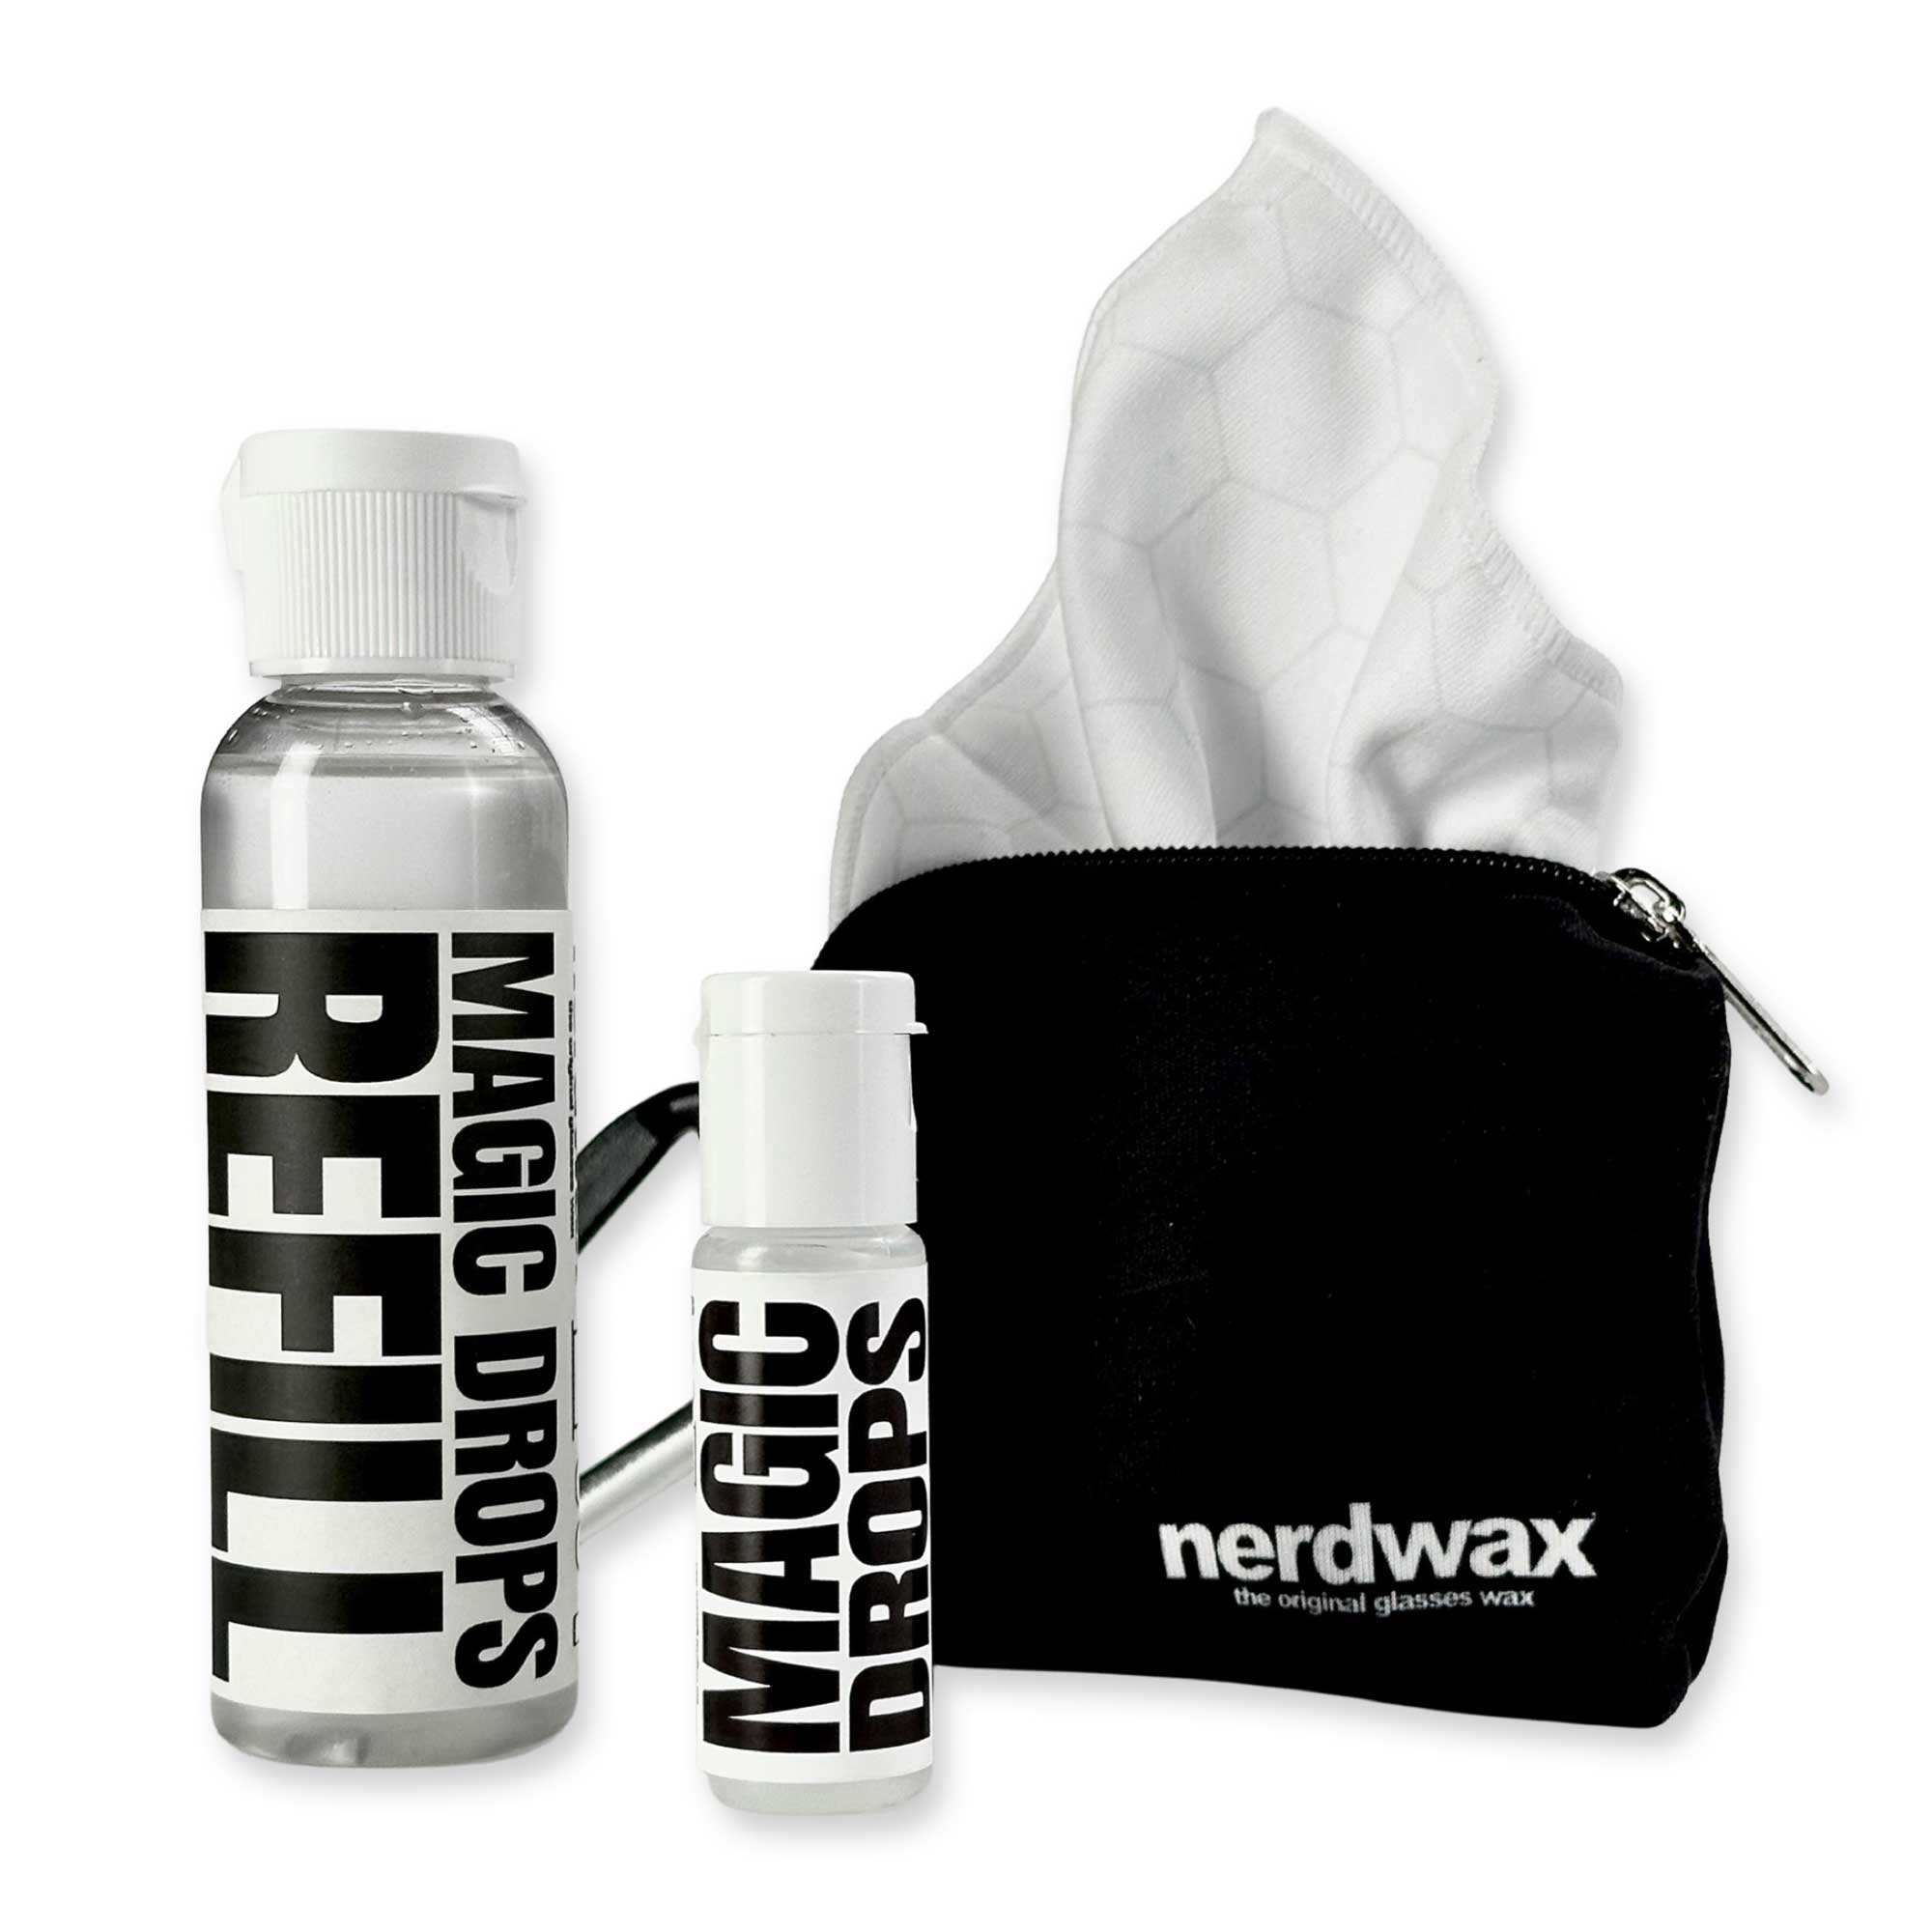 Nerdwax Magic Drops Glasses Cleaning Kit | A Magical Clean for Your Sunnies Specs & Screens